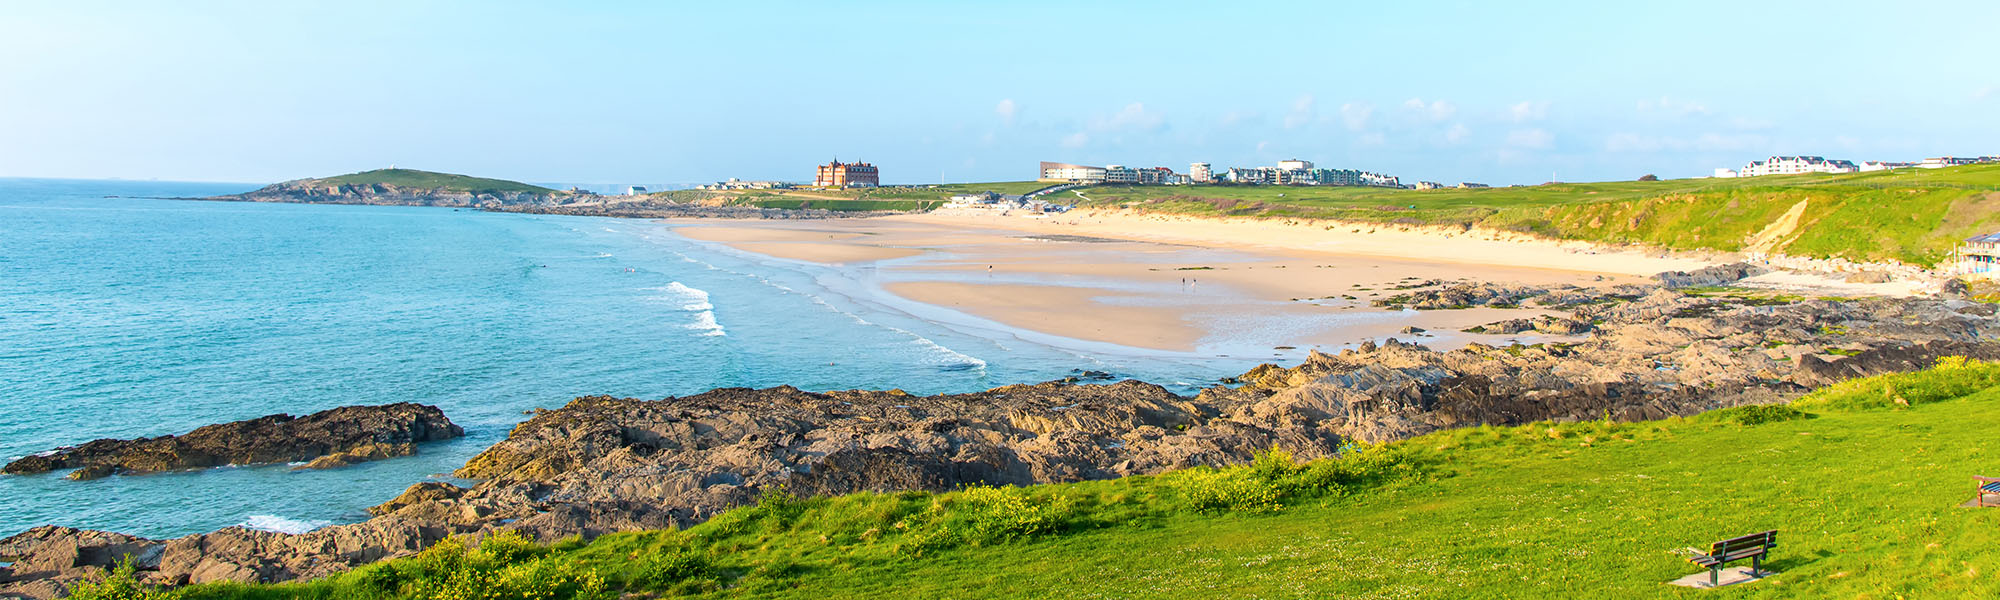 tourhub | Just Go Holidays | St Ives, the Isles of Scilly & South Cornwall 